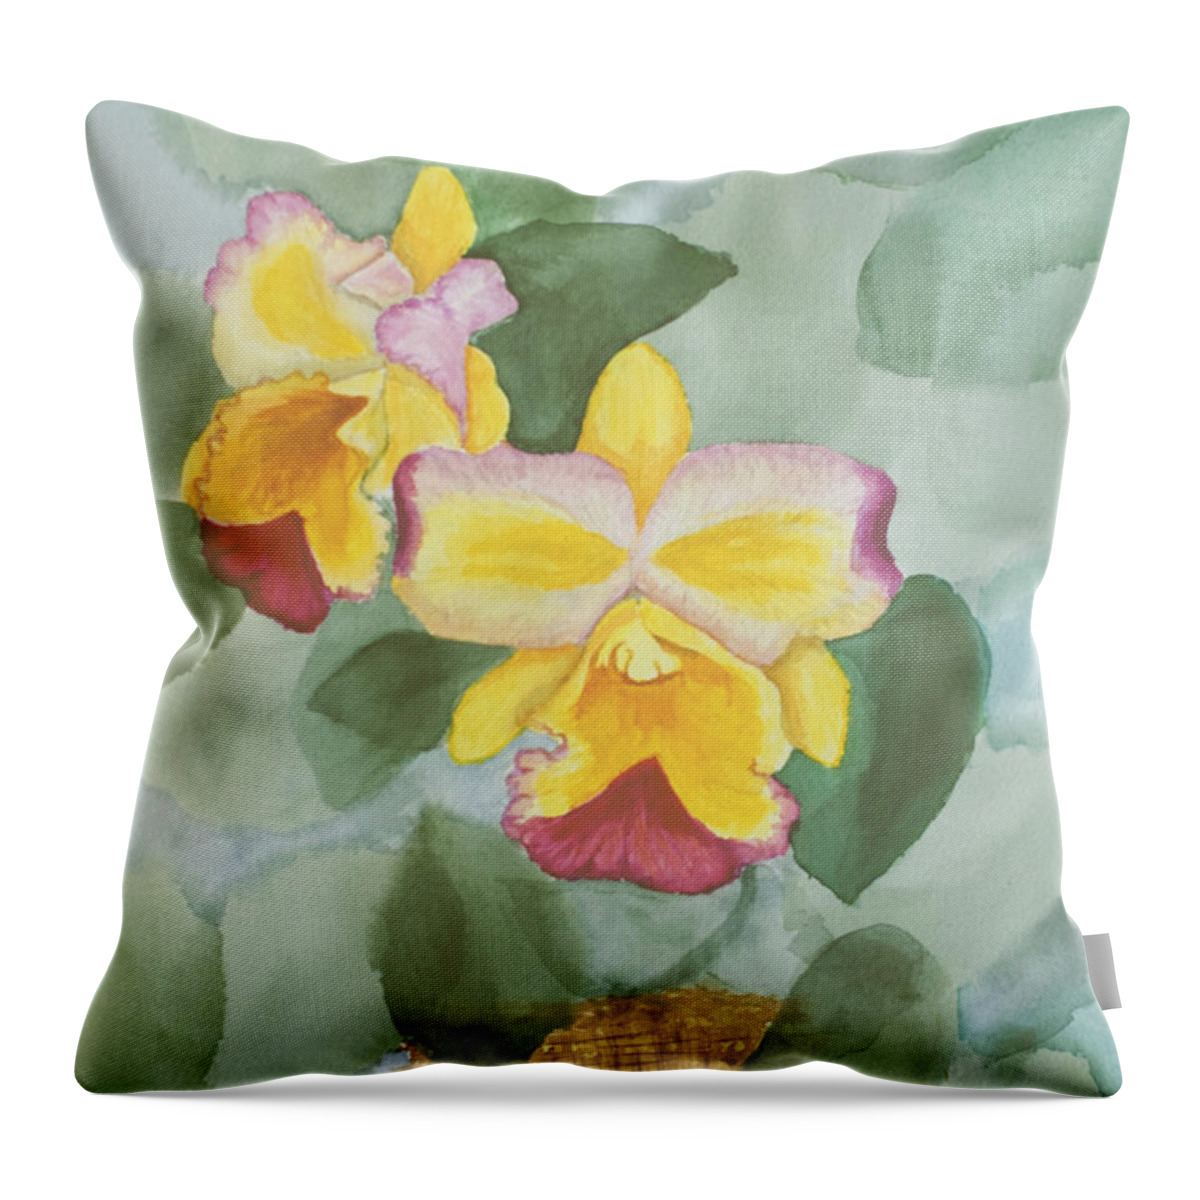 Orchids Throw Pillow featuring the painting Gypsy Orchids by Peggy King